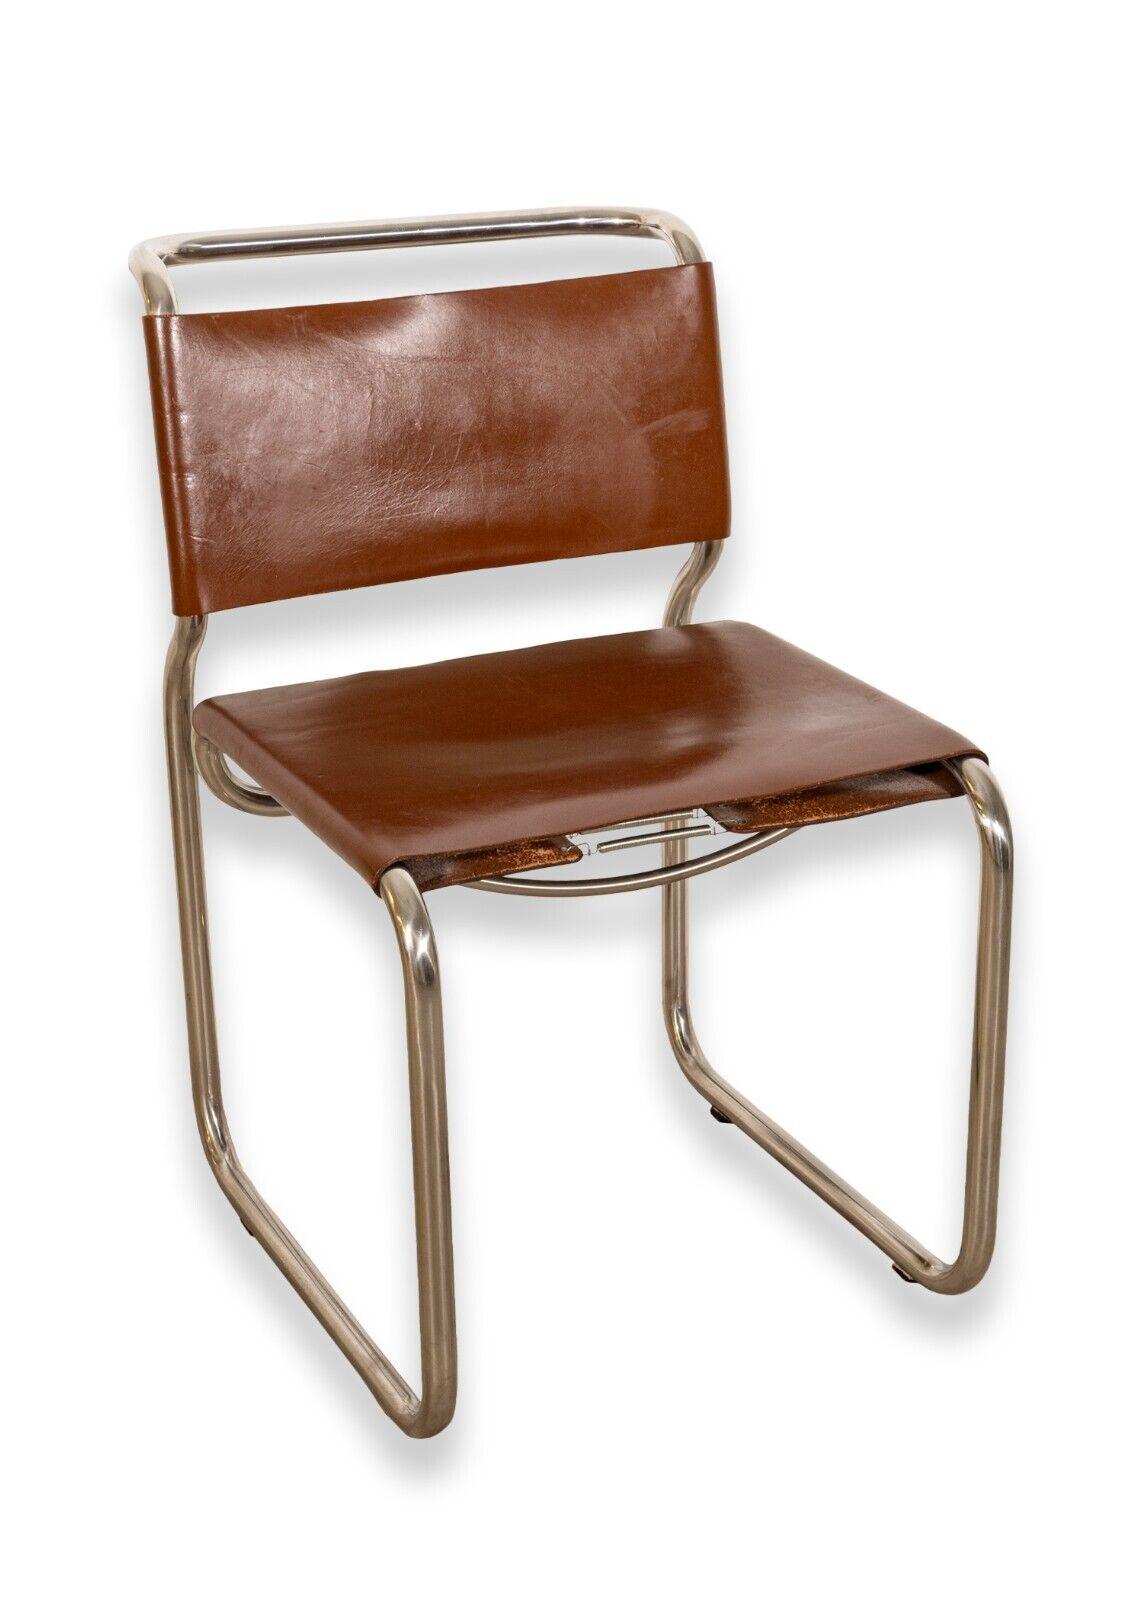 A set of 7 Nicos Zographos CH66 chrome and brown leather cantilever dining chairs. A wonderful set of rare dining chairs from Nicos Zographos. These chairs feature a cantilever design with a chrome finished metal tubular frame, brown leather seats